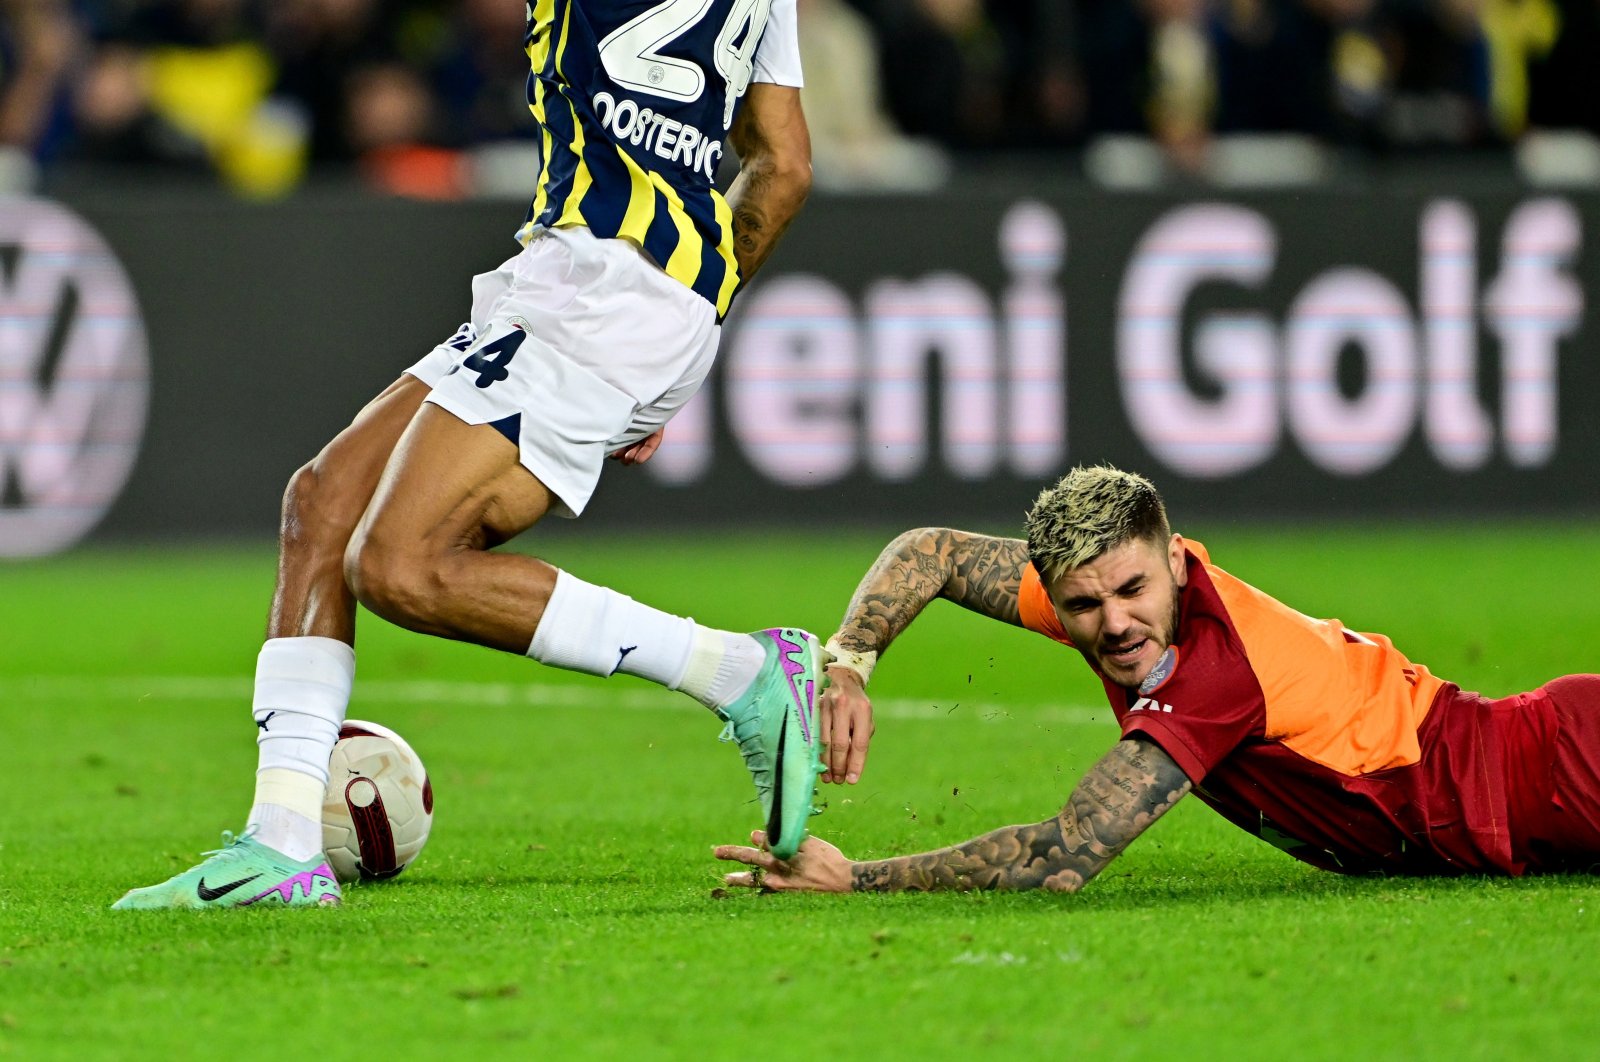 Galatasaray’s Icardi faces extended sideline due to face injury